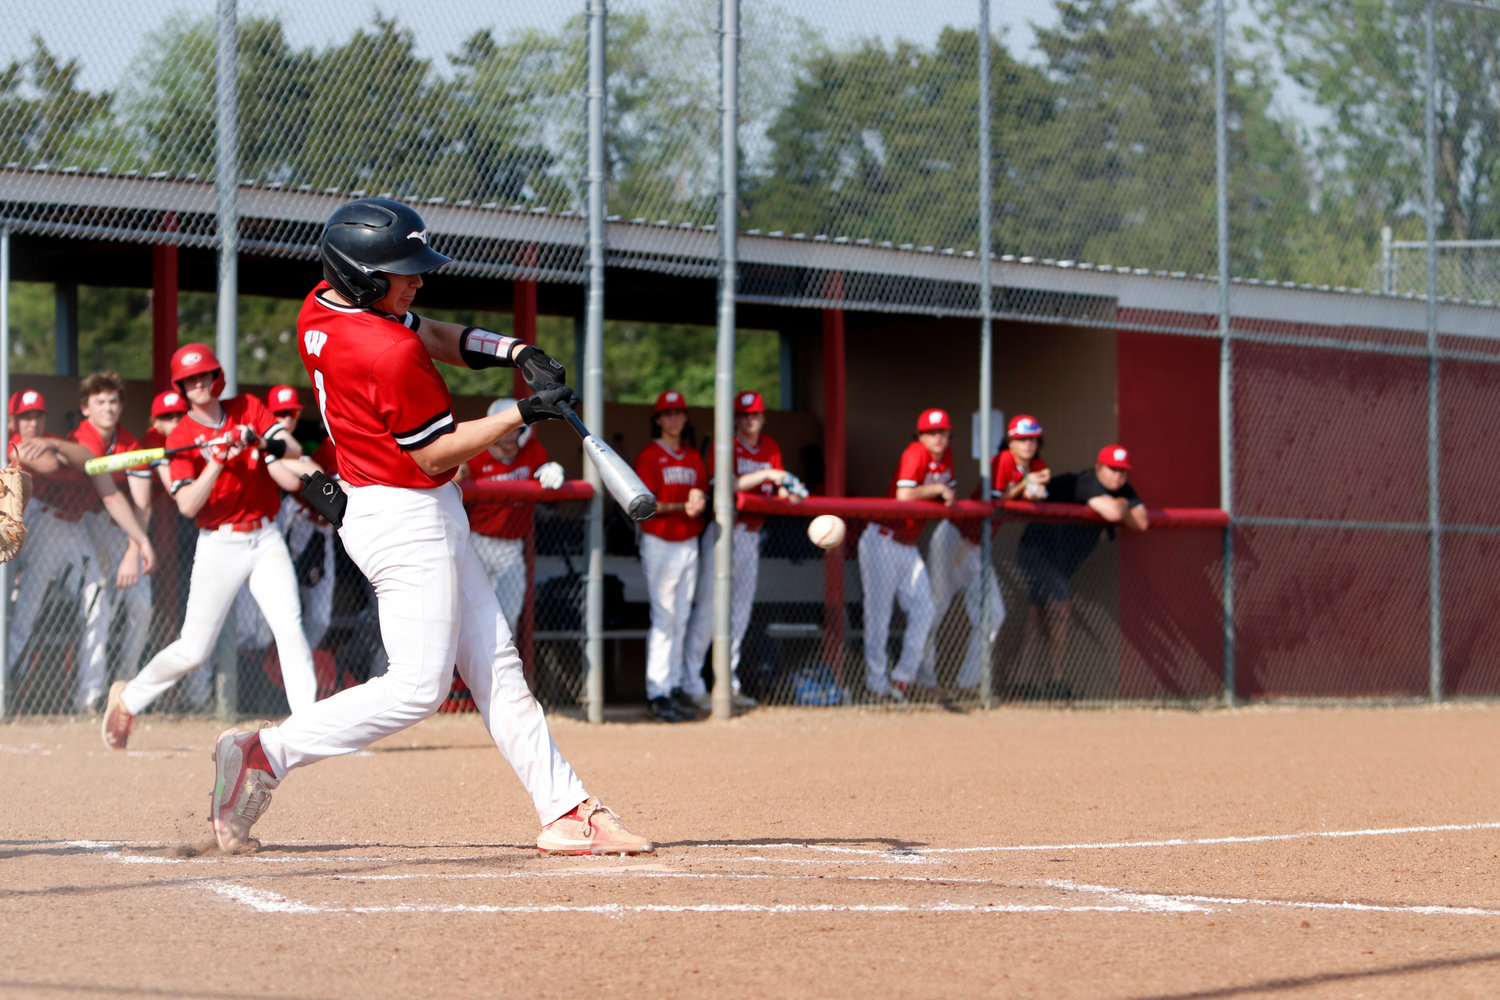 Austin Haas hits the ball during the third inning of Monday’s game against St. Charles West.